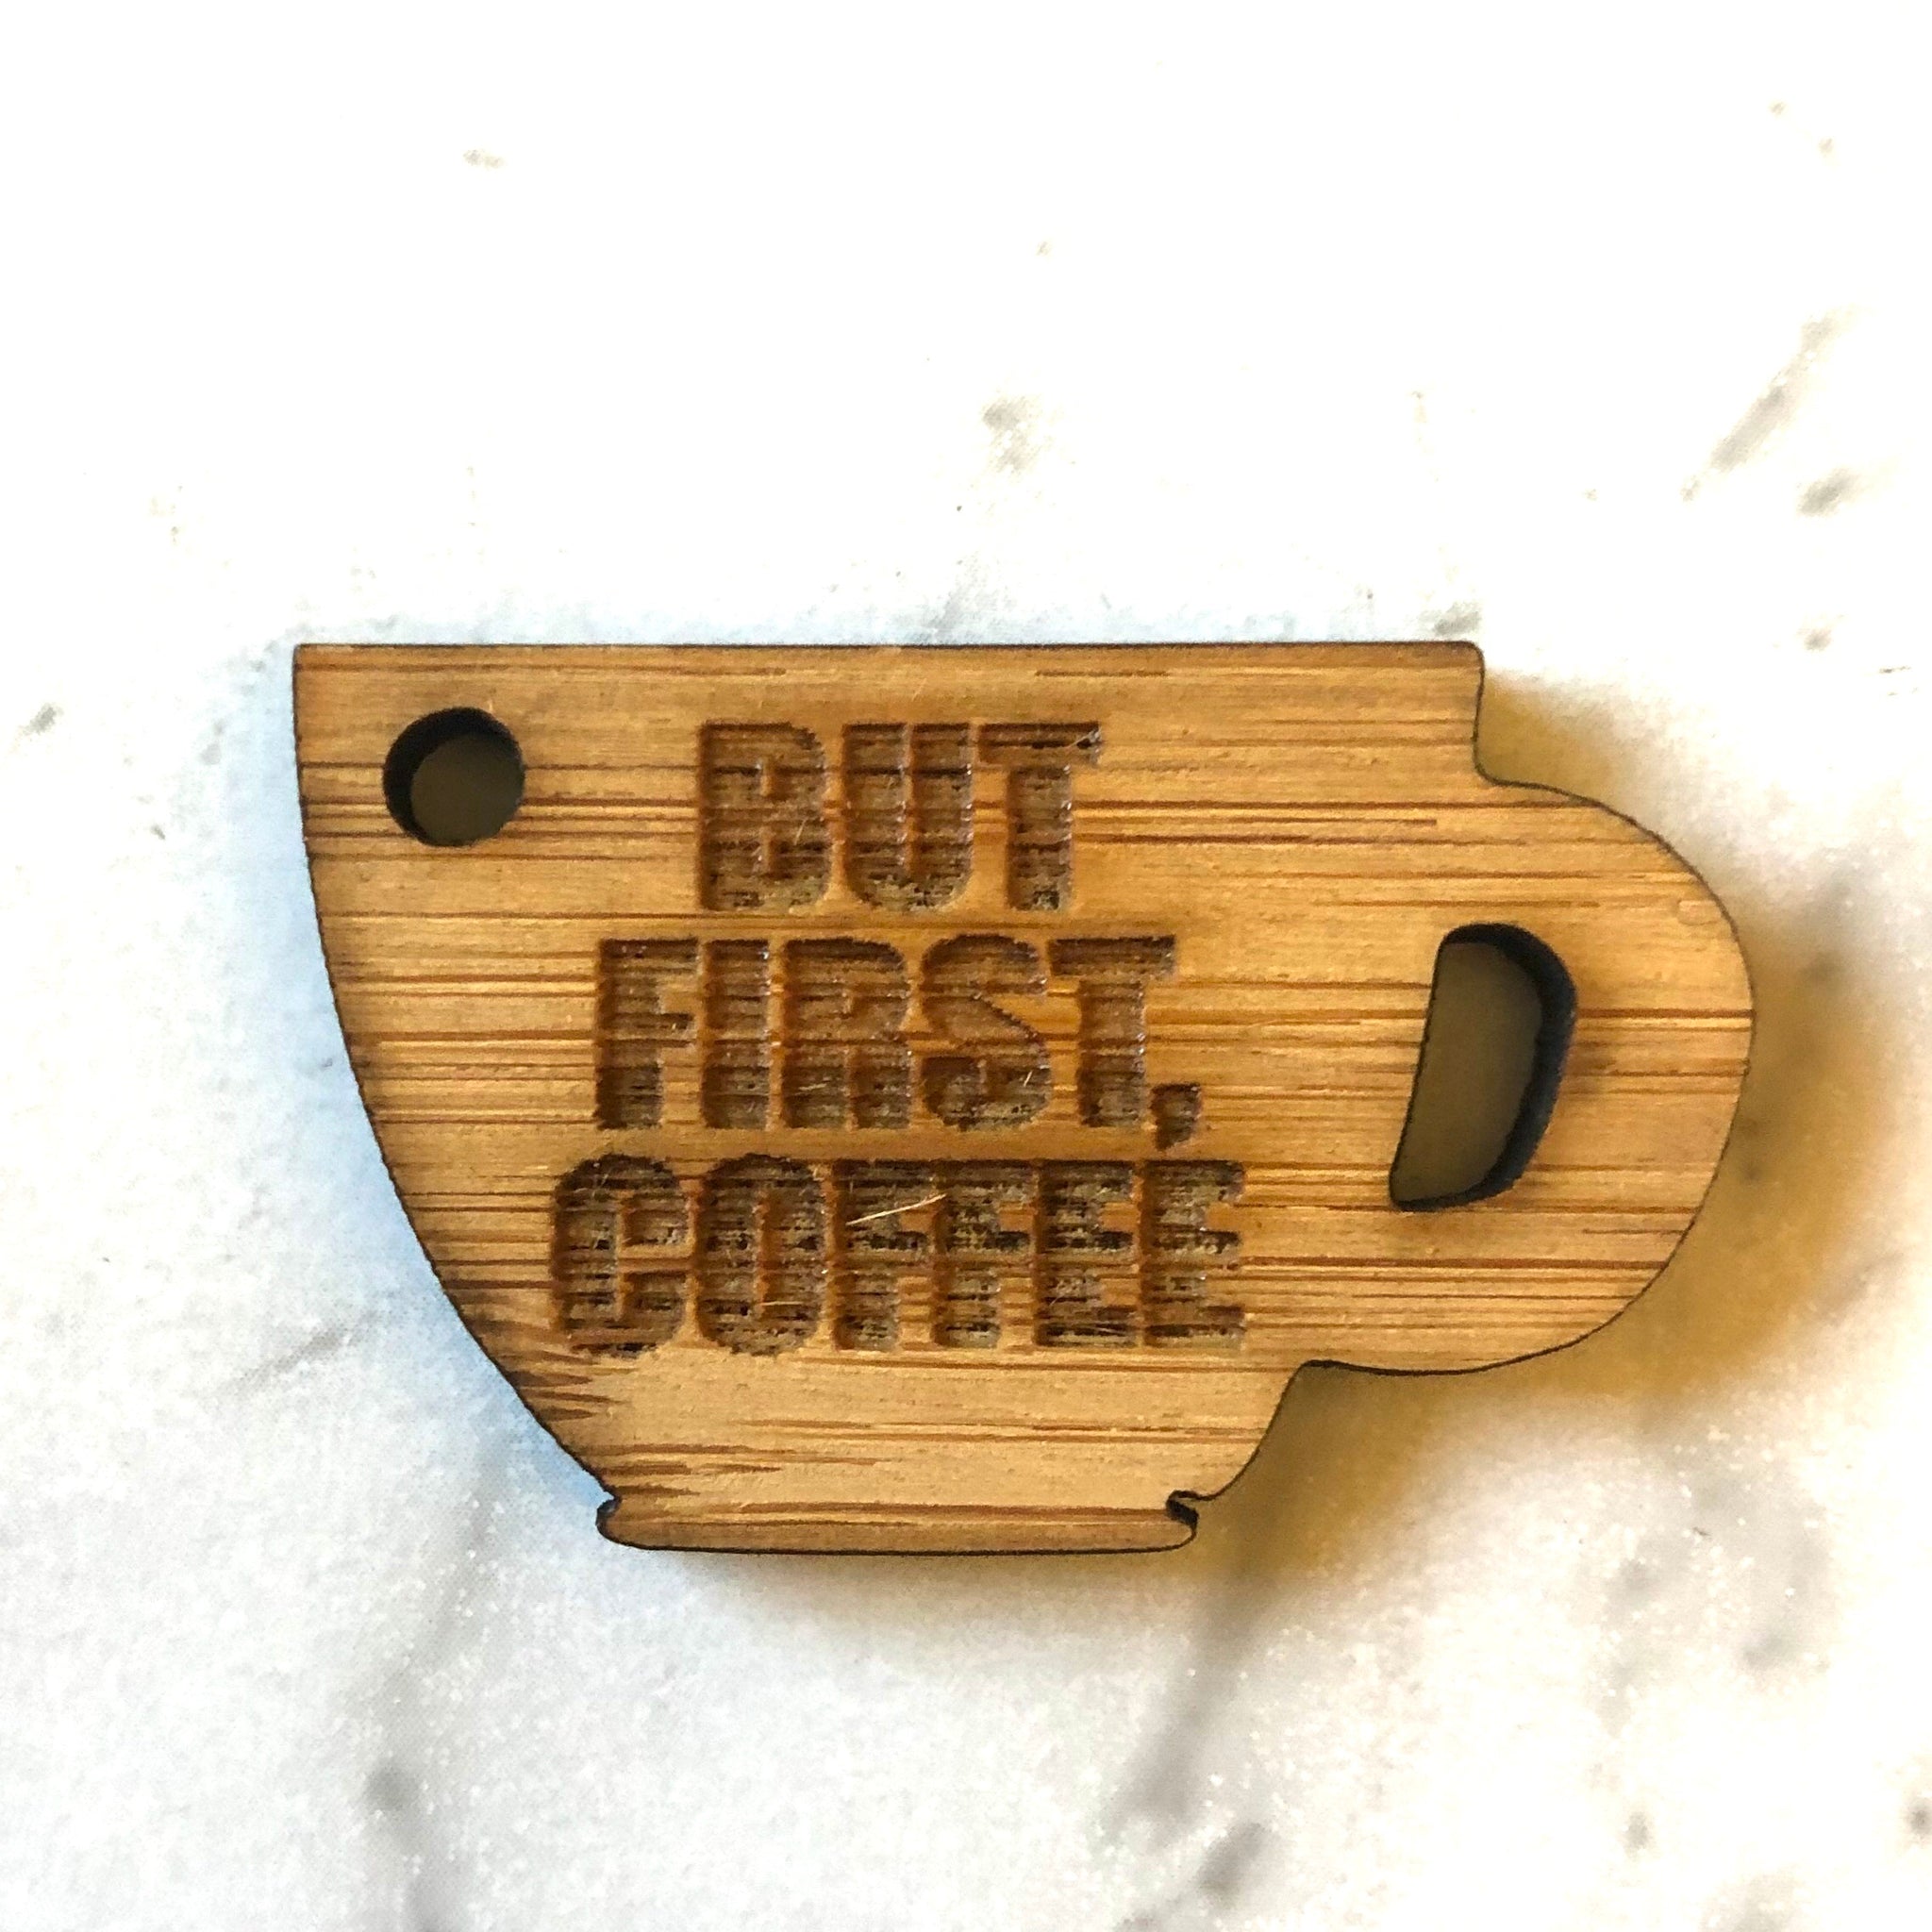 Add-on - But first coffee